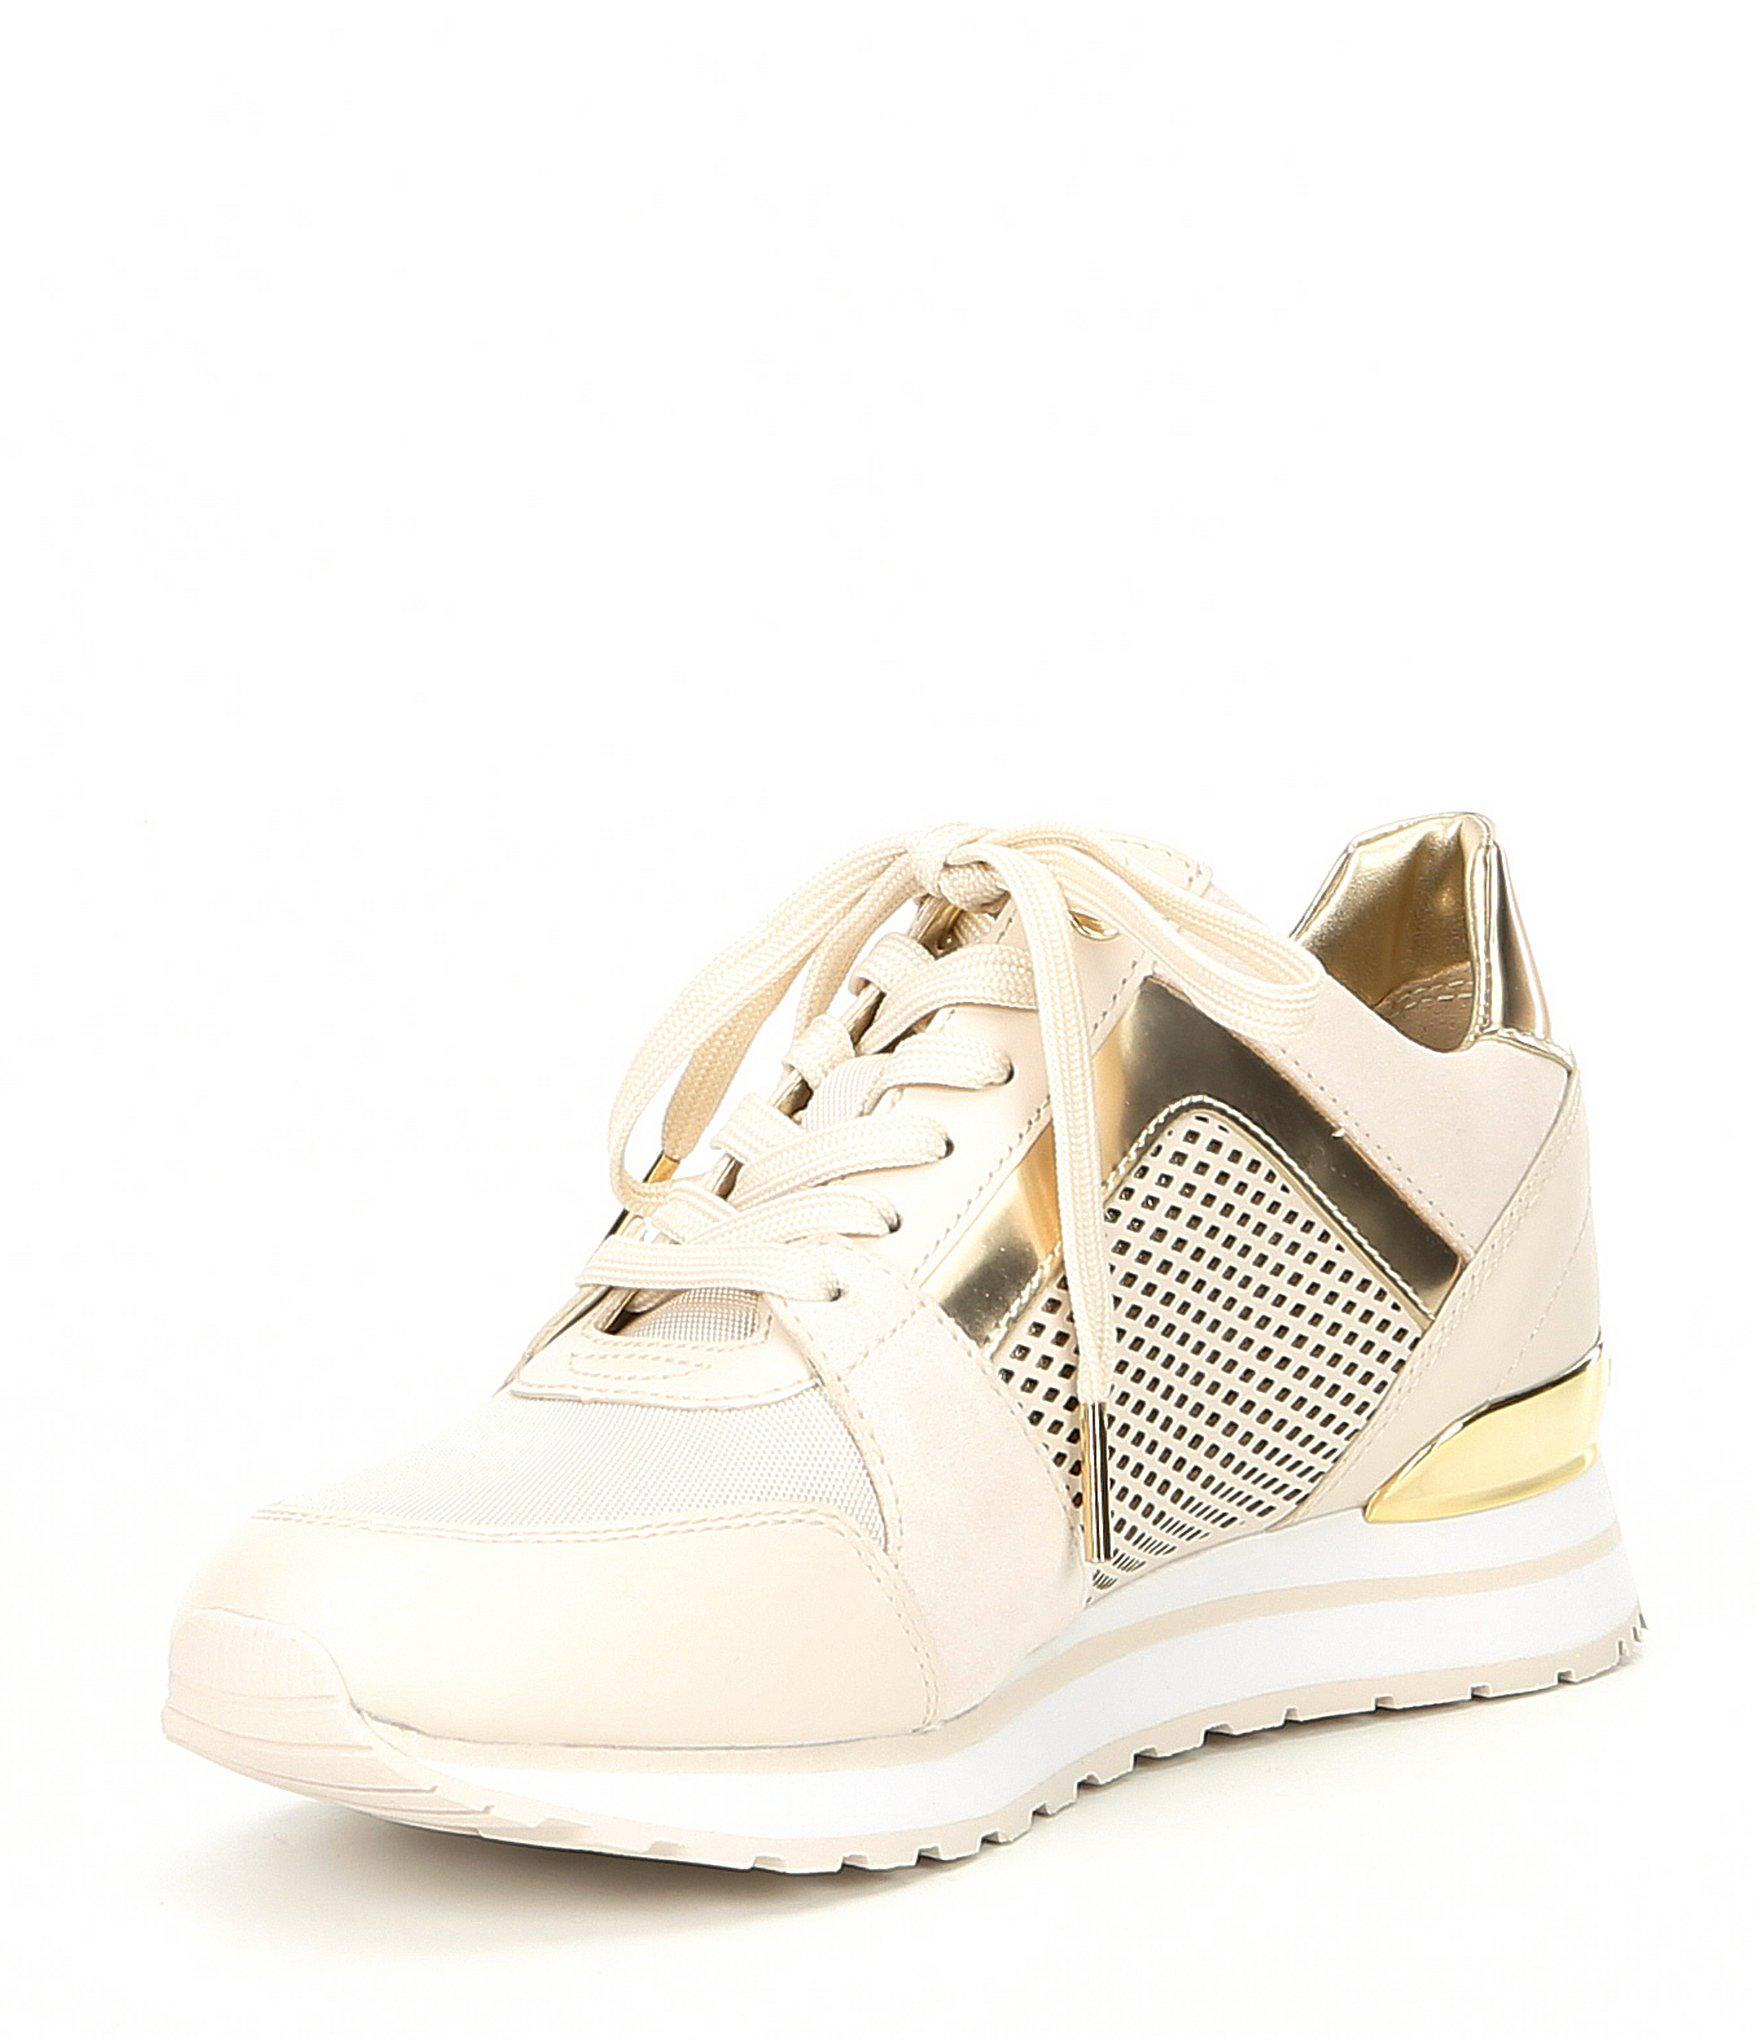 Foreword Parcel plenty Michael Kors Michael Michael Kors Womens Billie Trainer Leather Low Top  Lace Up Running Sn...